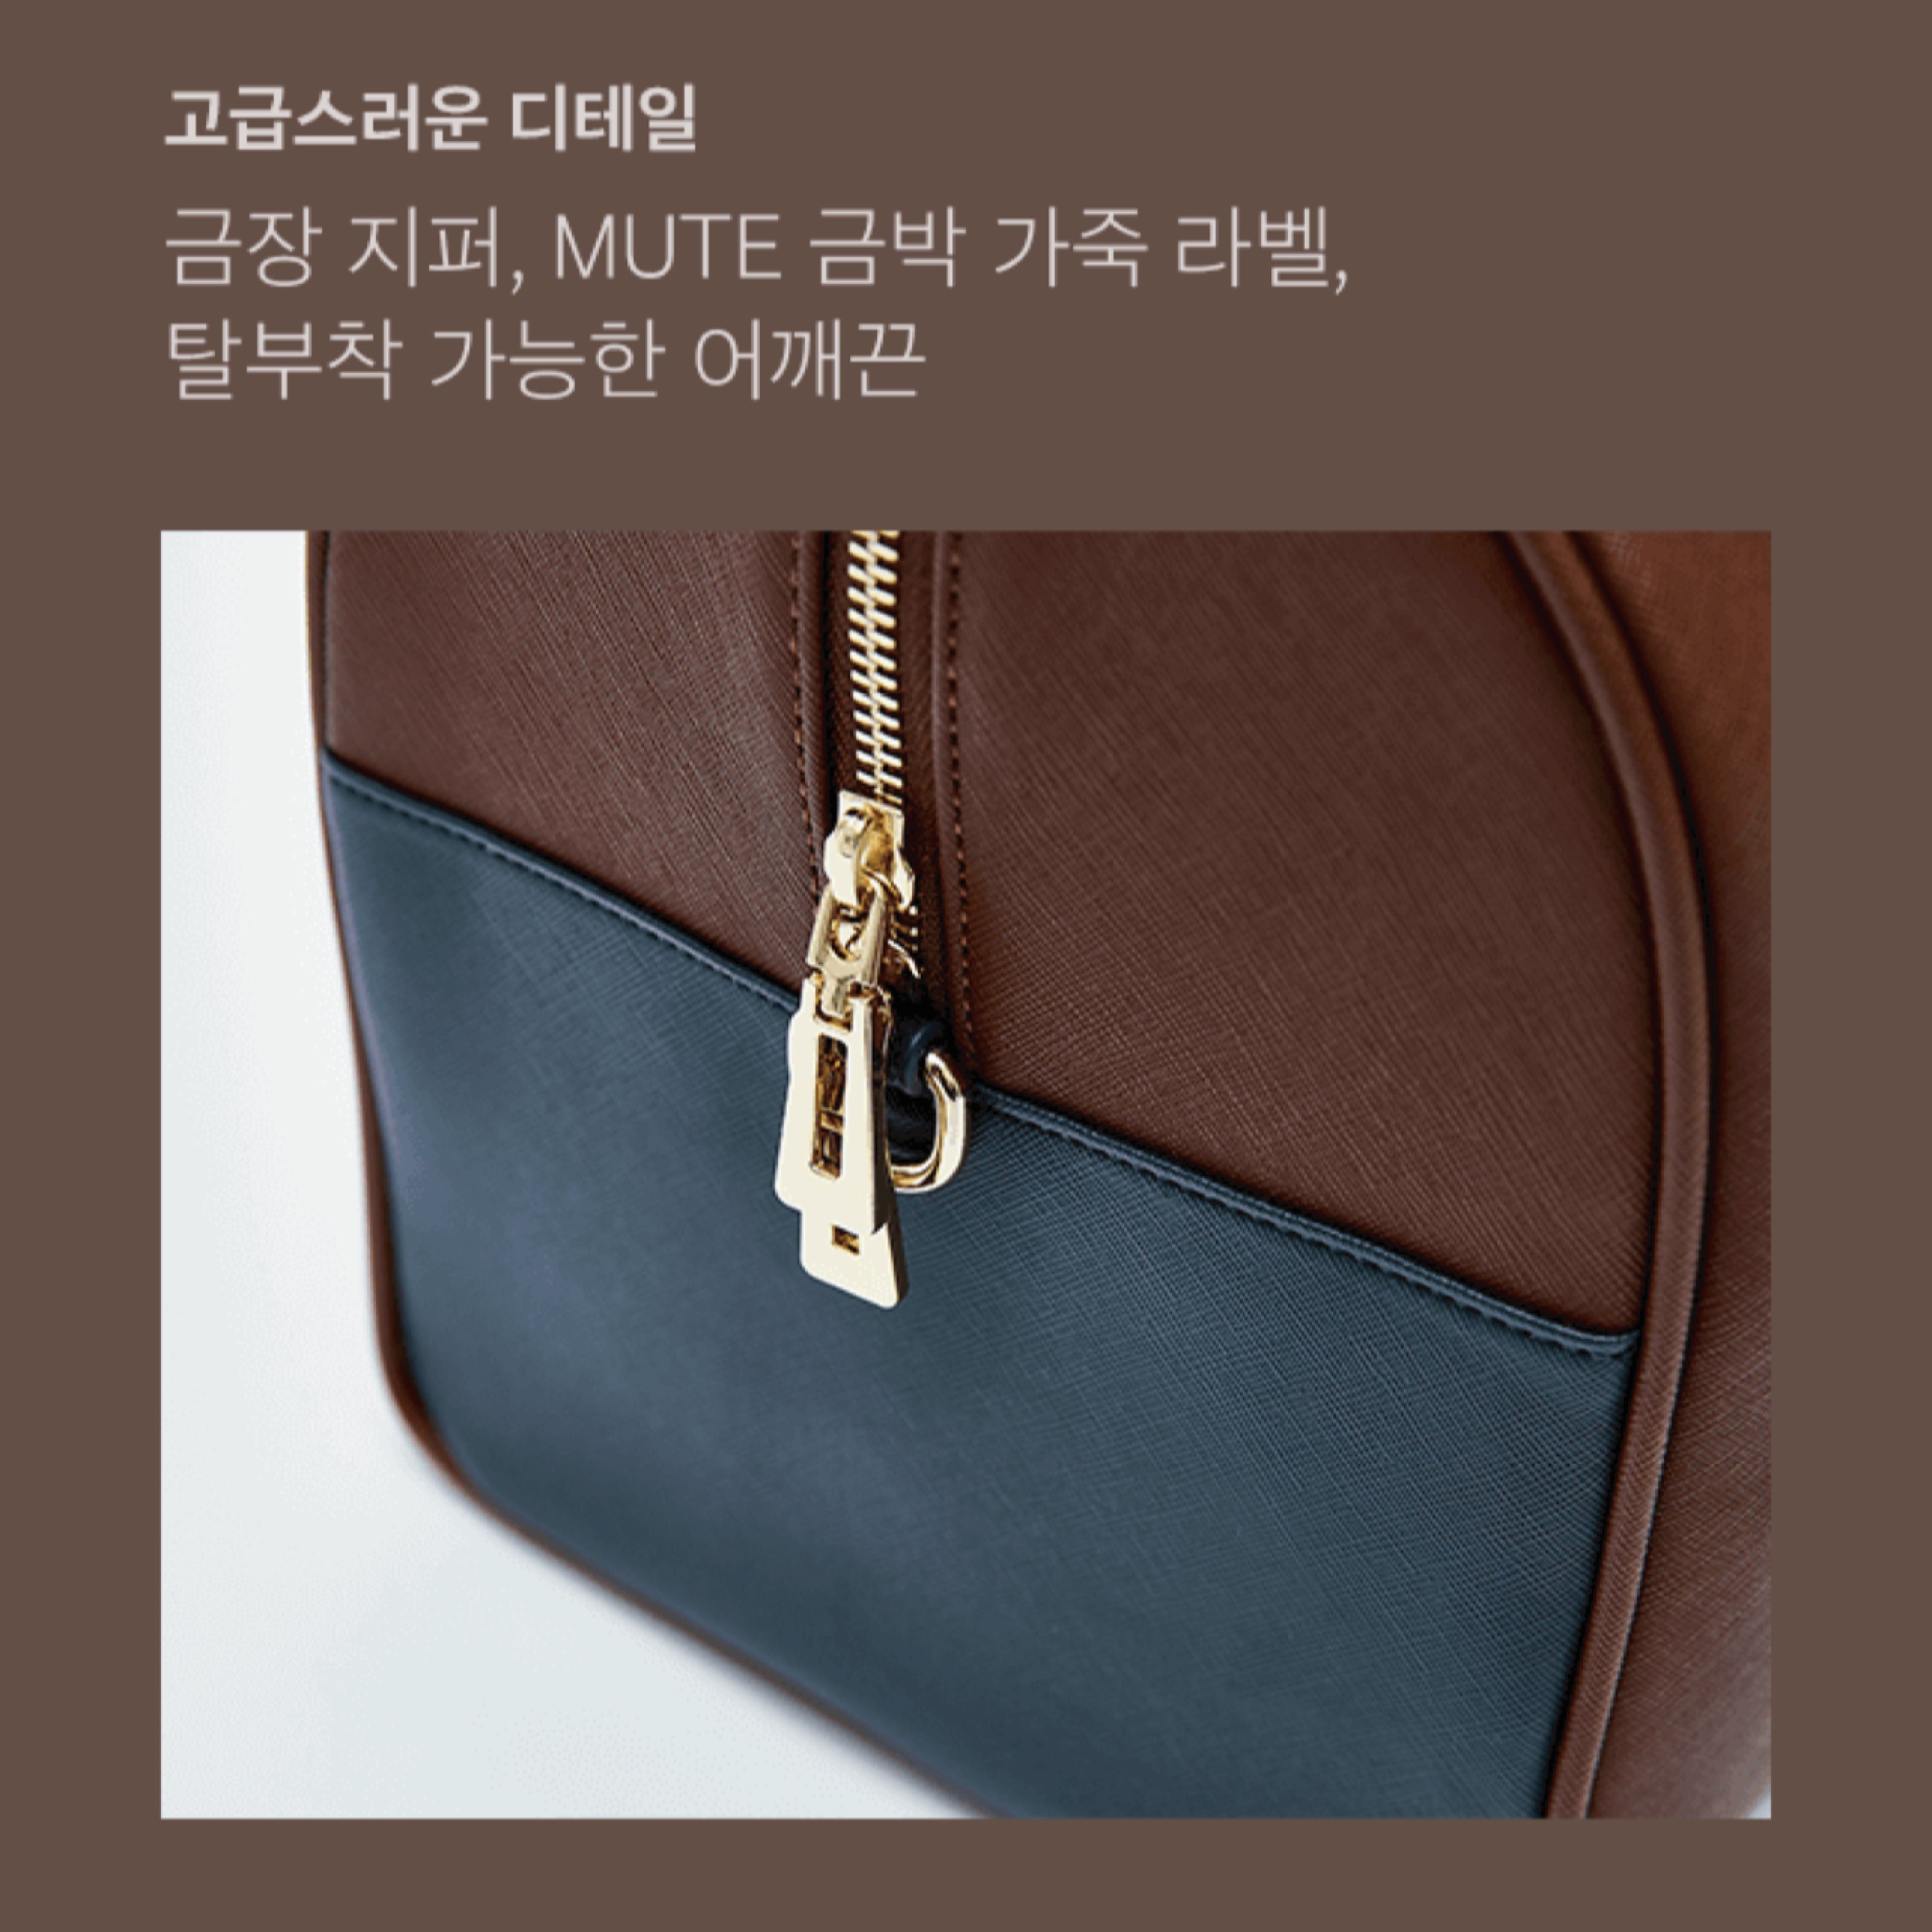 INFO] Taehyung's Mute boston bag immediately sold out on both Weverse... |  TikTok